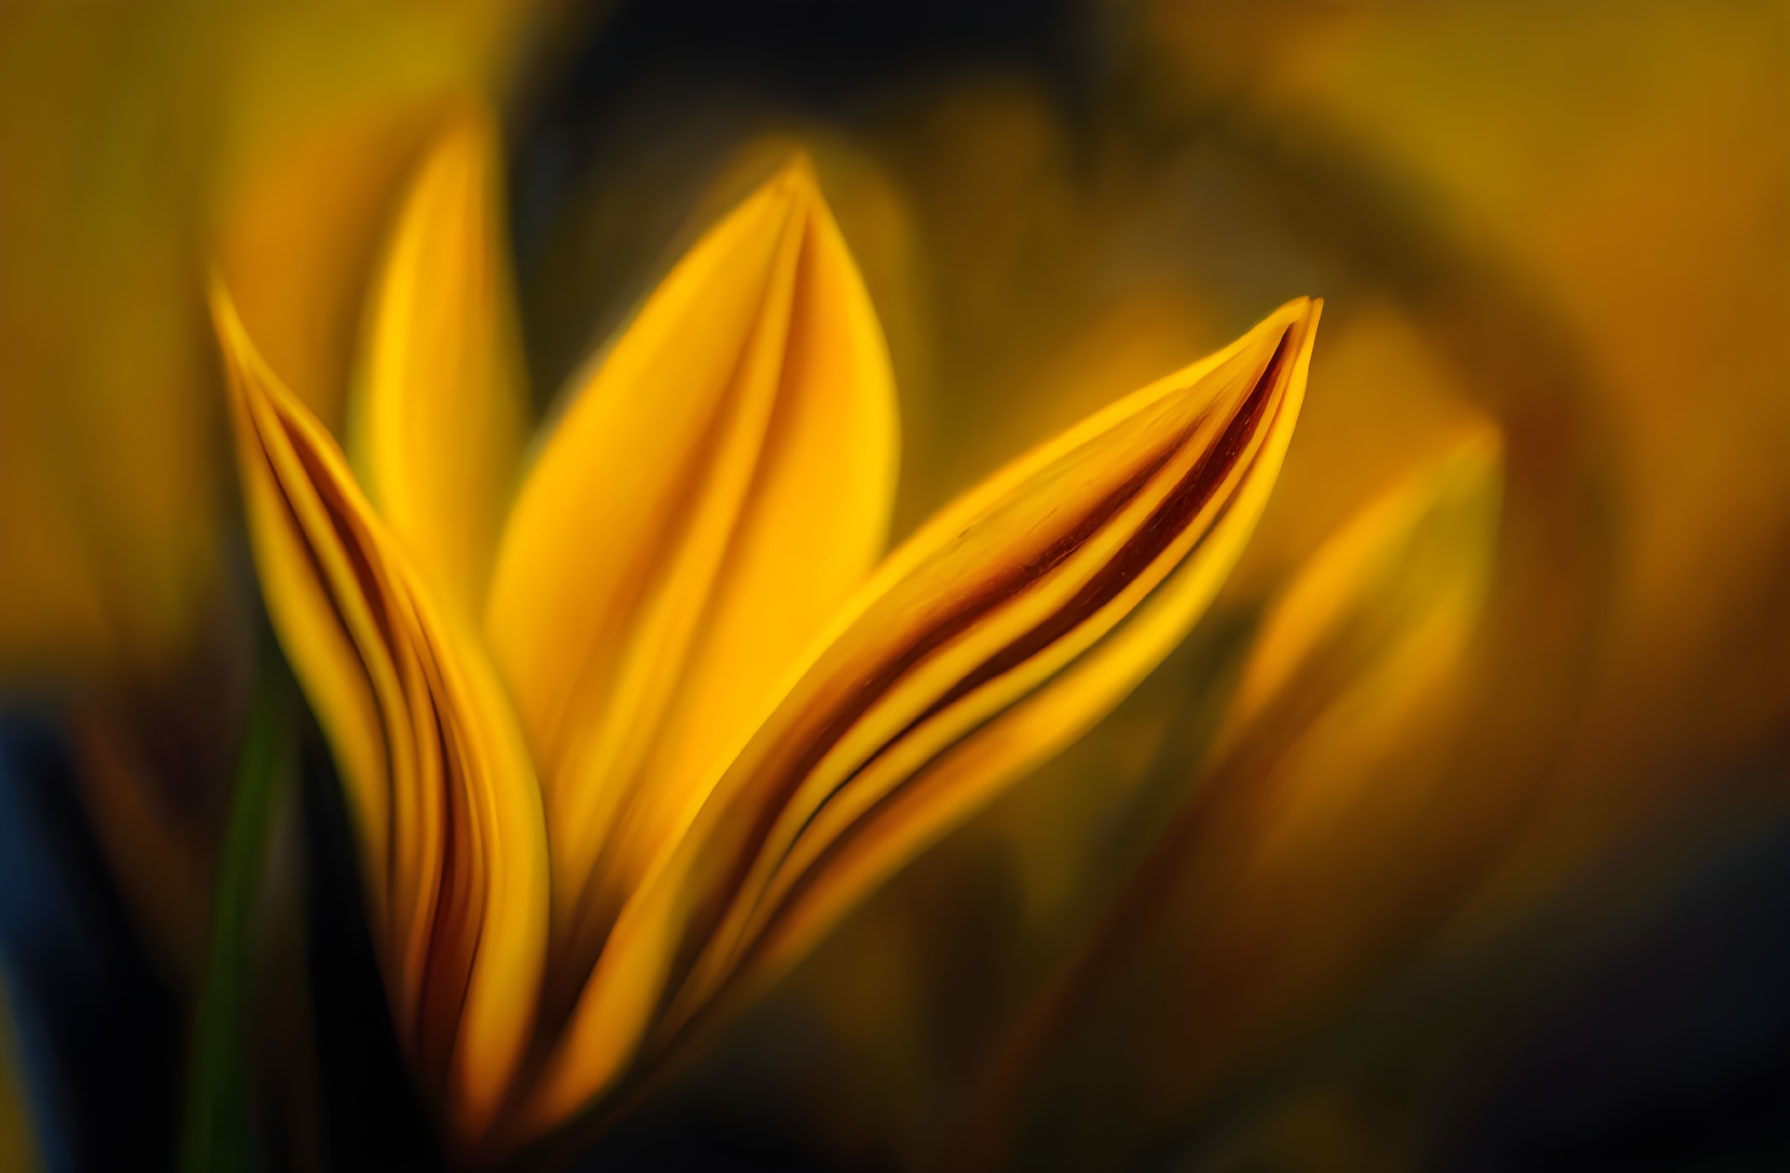 Vibrant Yellow Flower Close-Up with Soft Focus Background